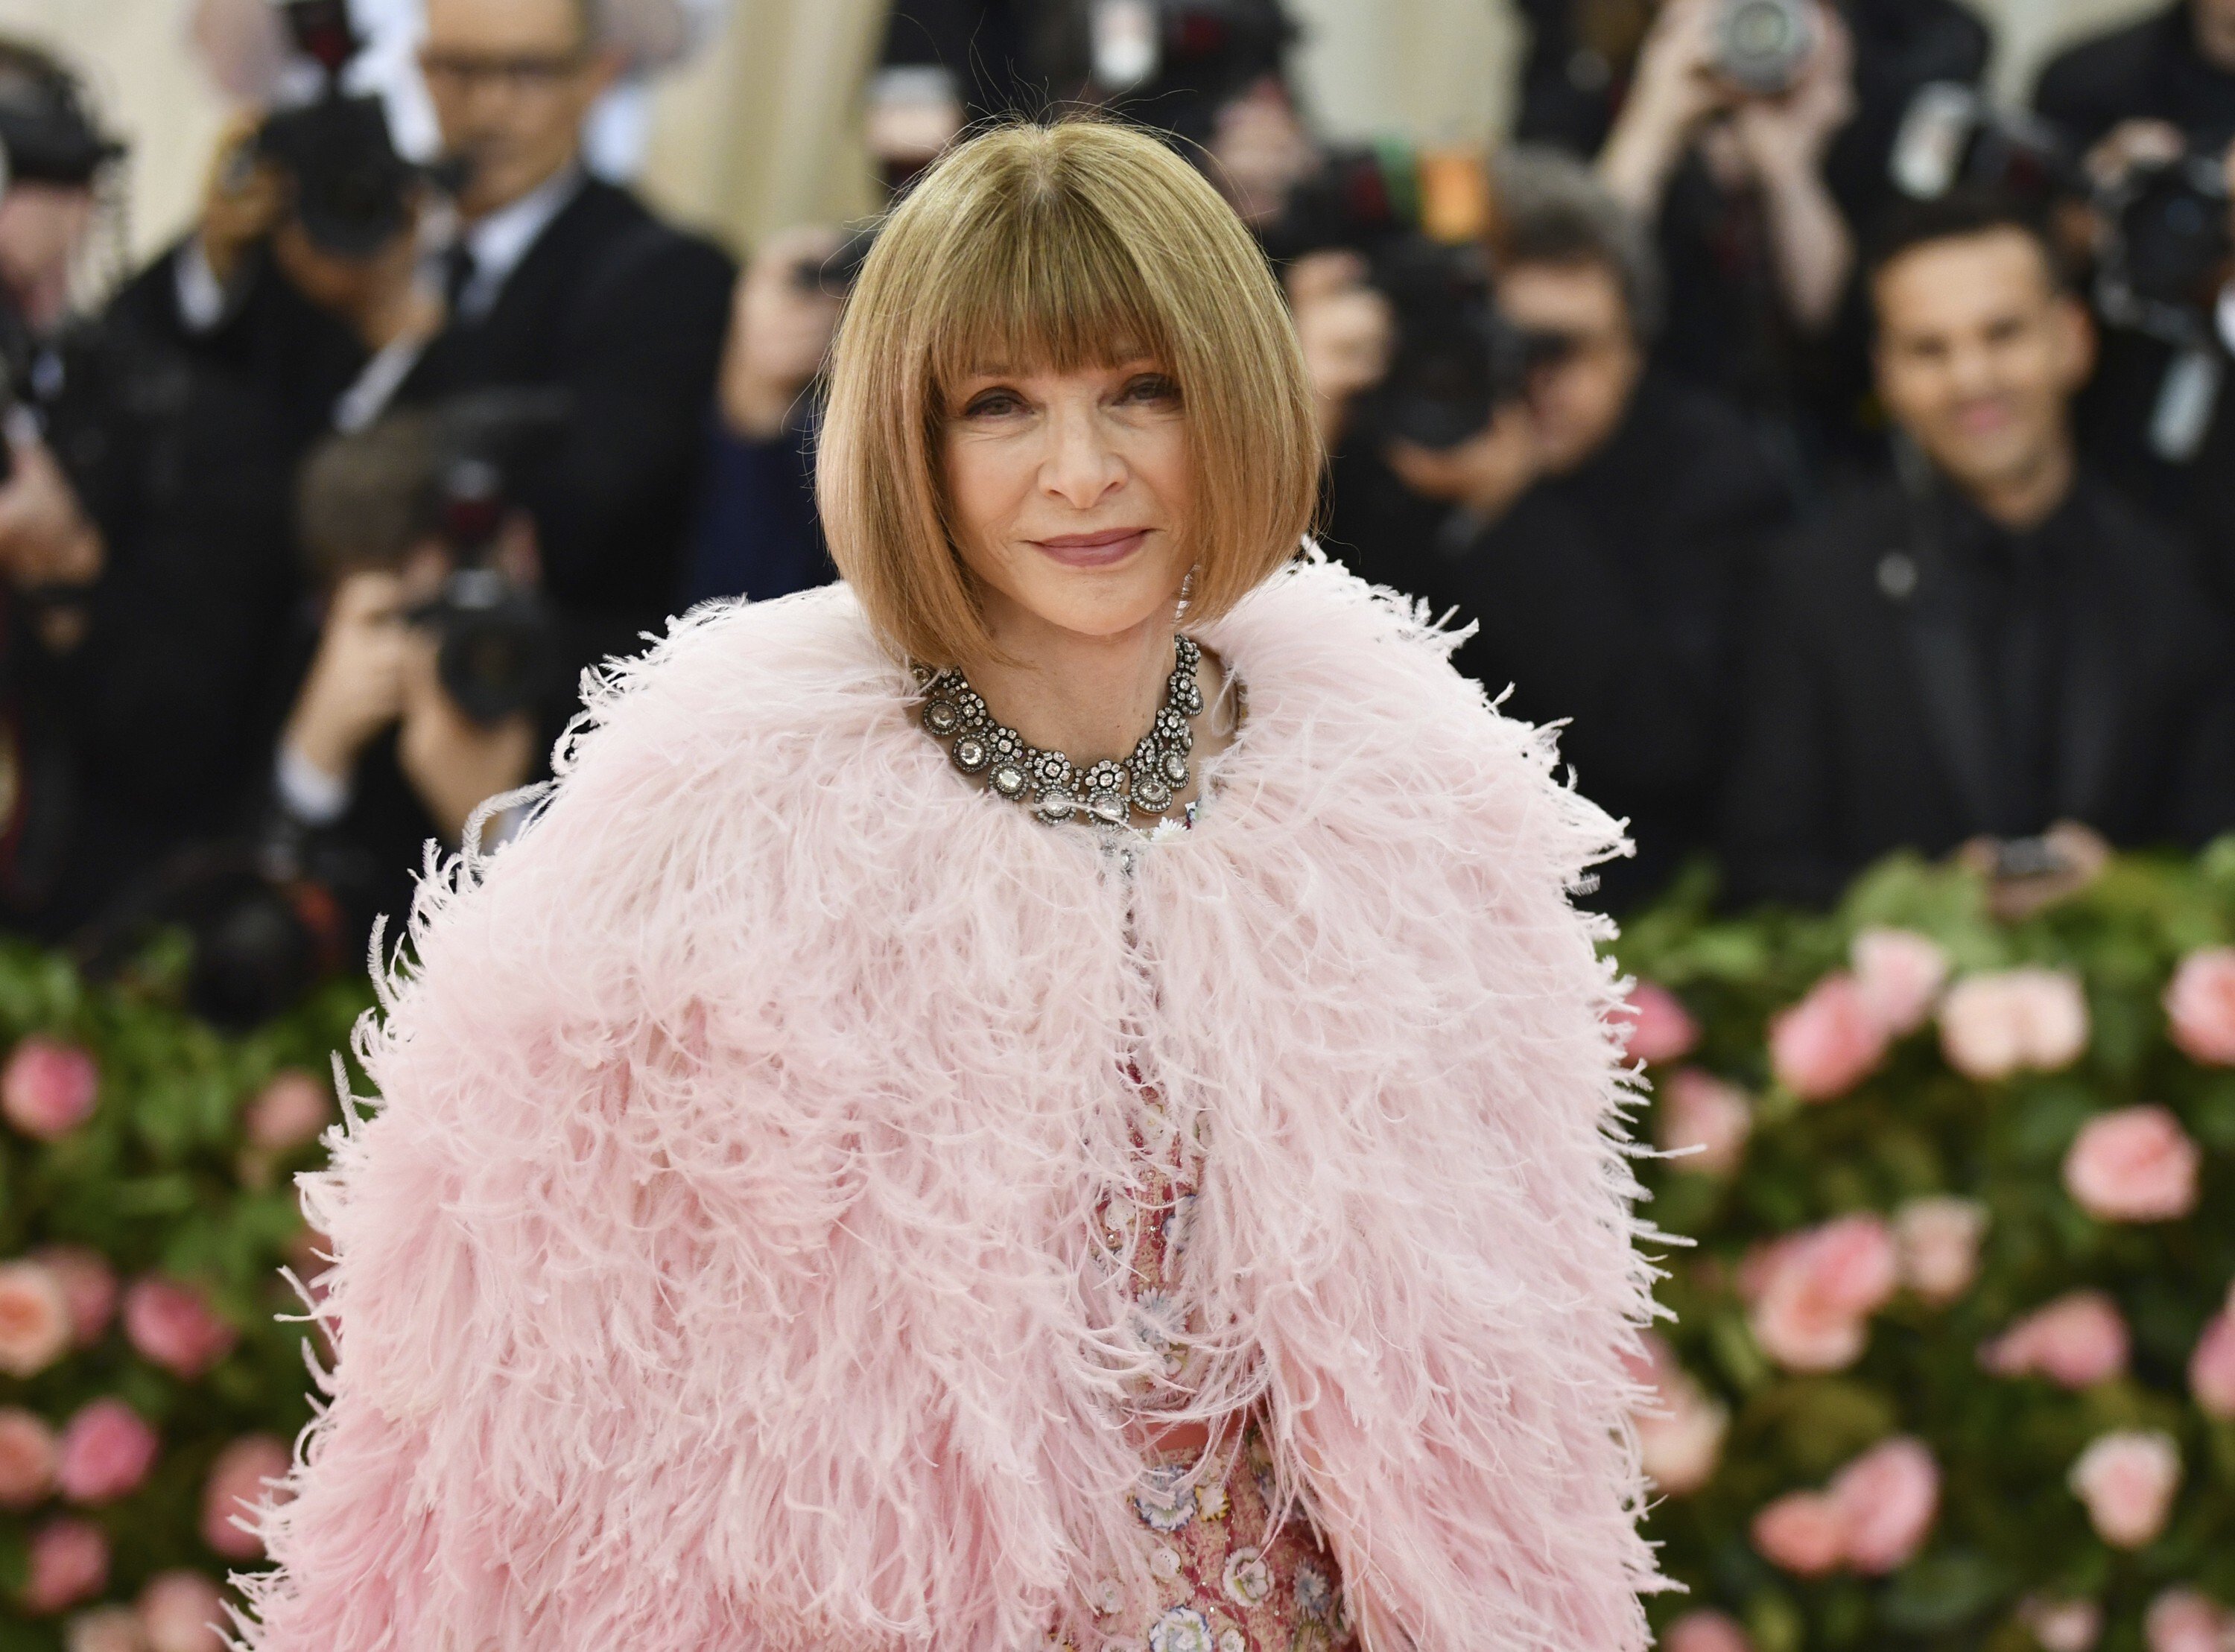 Loved, hated, but never ignored – Anna Wintour unmasked without her trademark sunglasses, at the Met Gala in 2019. Photo: AP